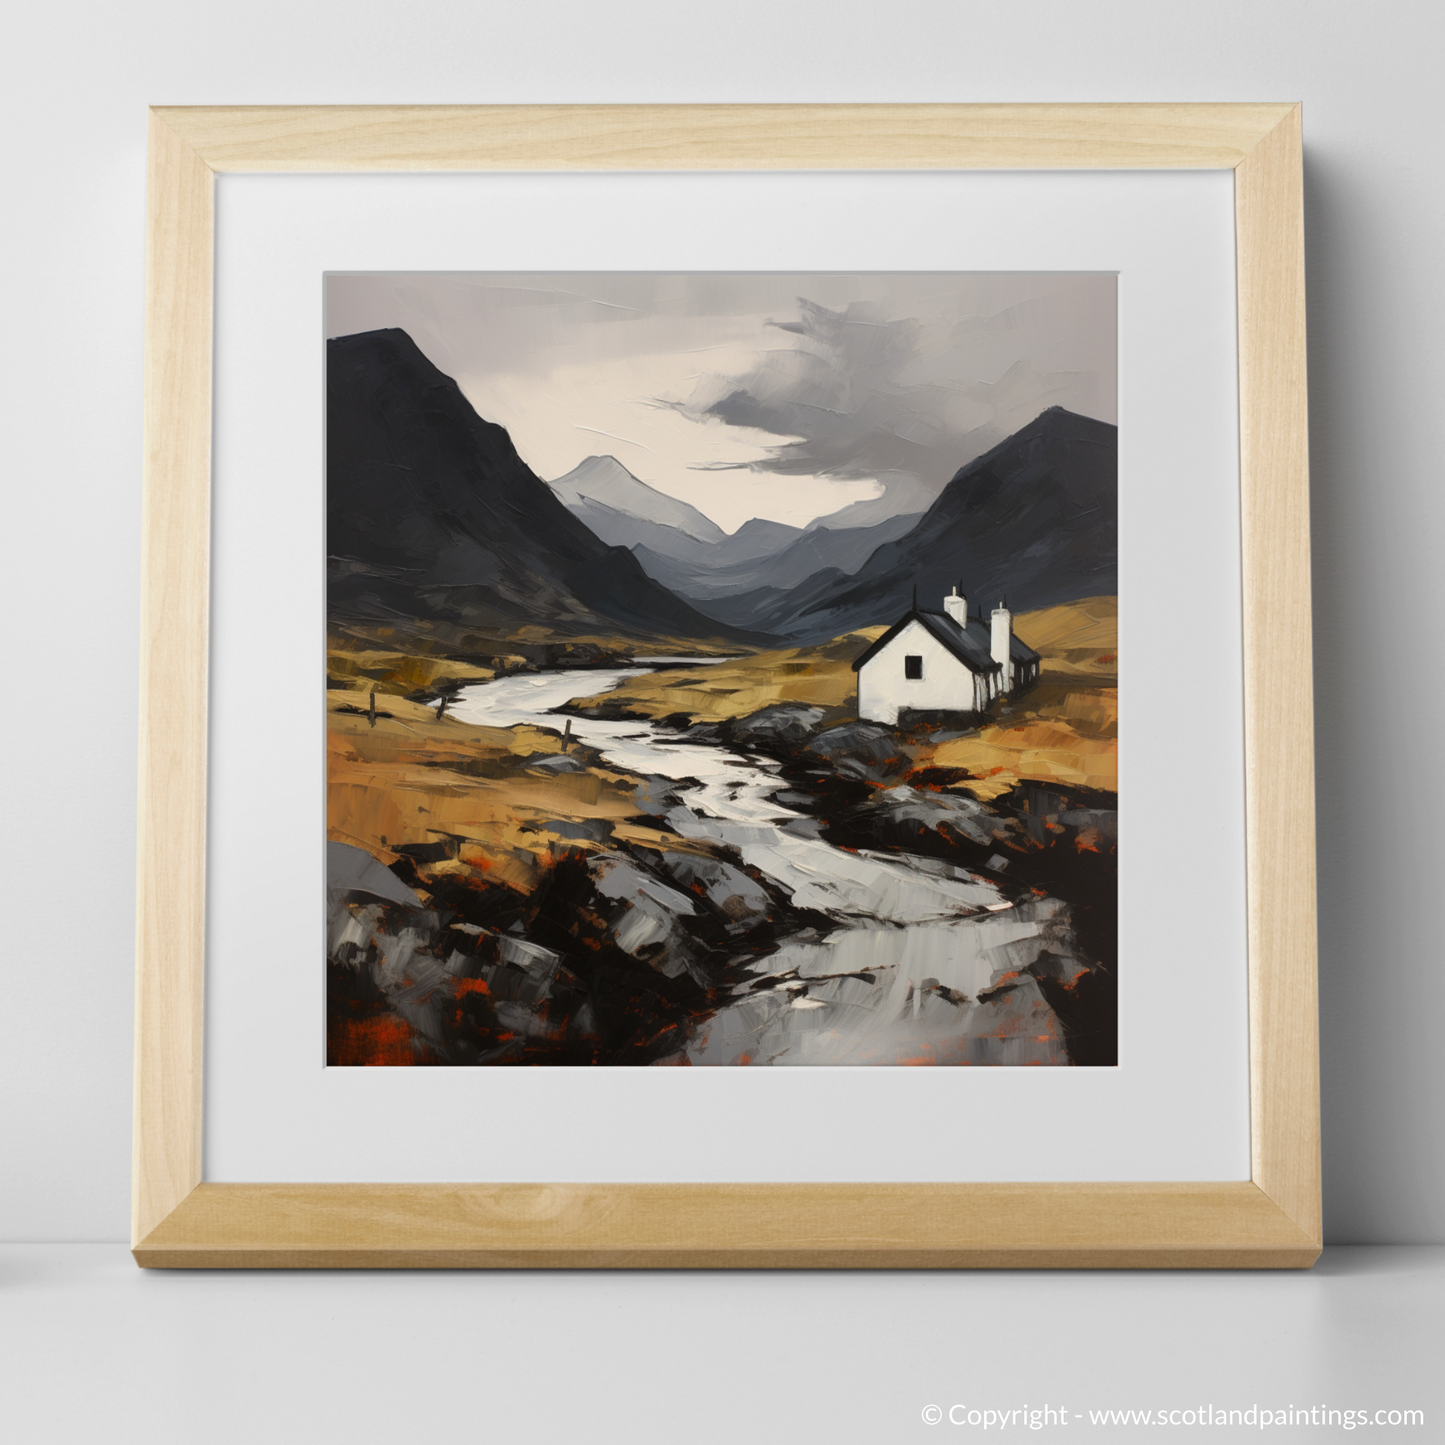 Art Print of Creag Leacach with a natural frame